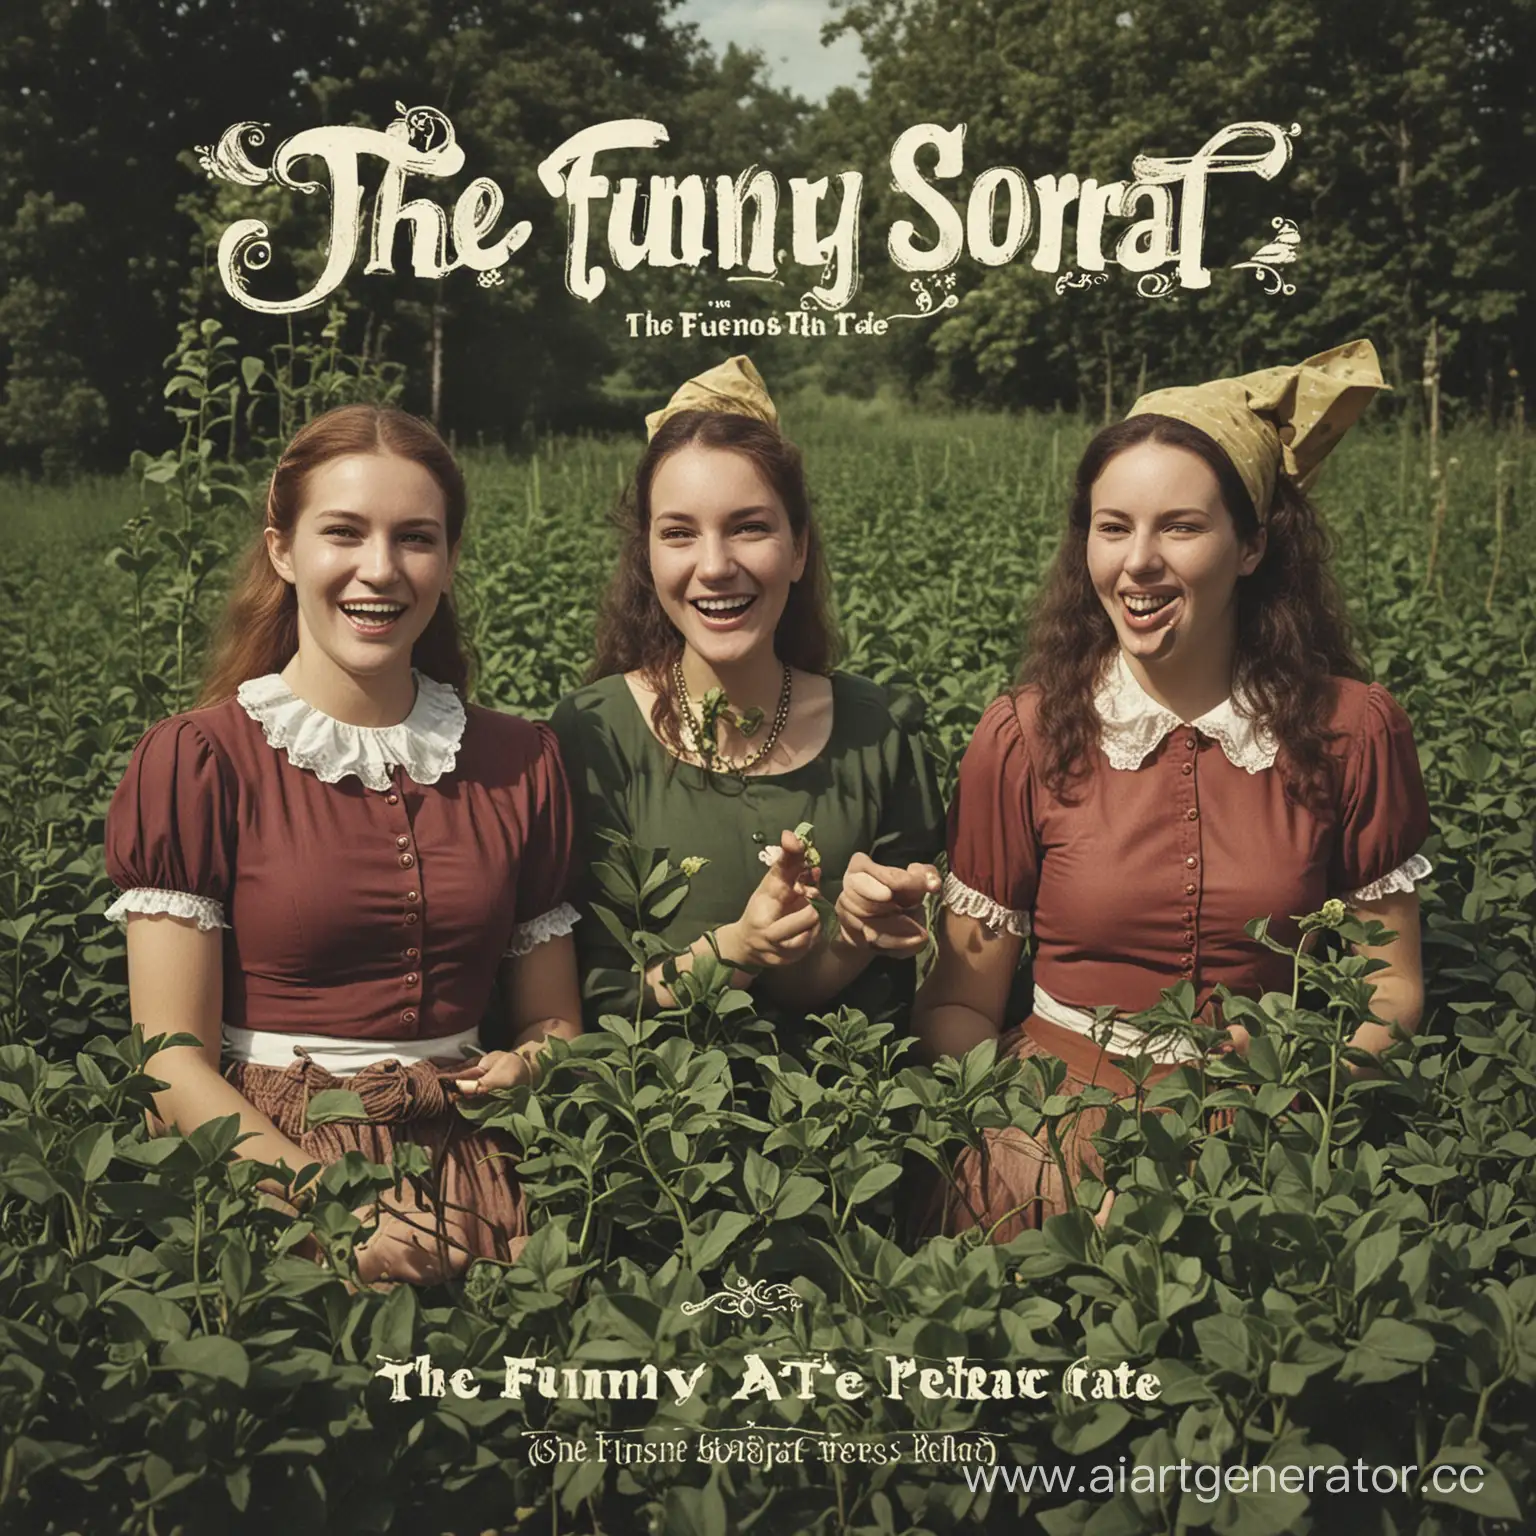 music album cover "The funny sorrel that Perno ate"